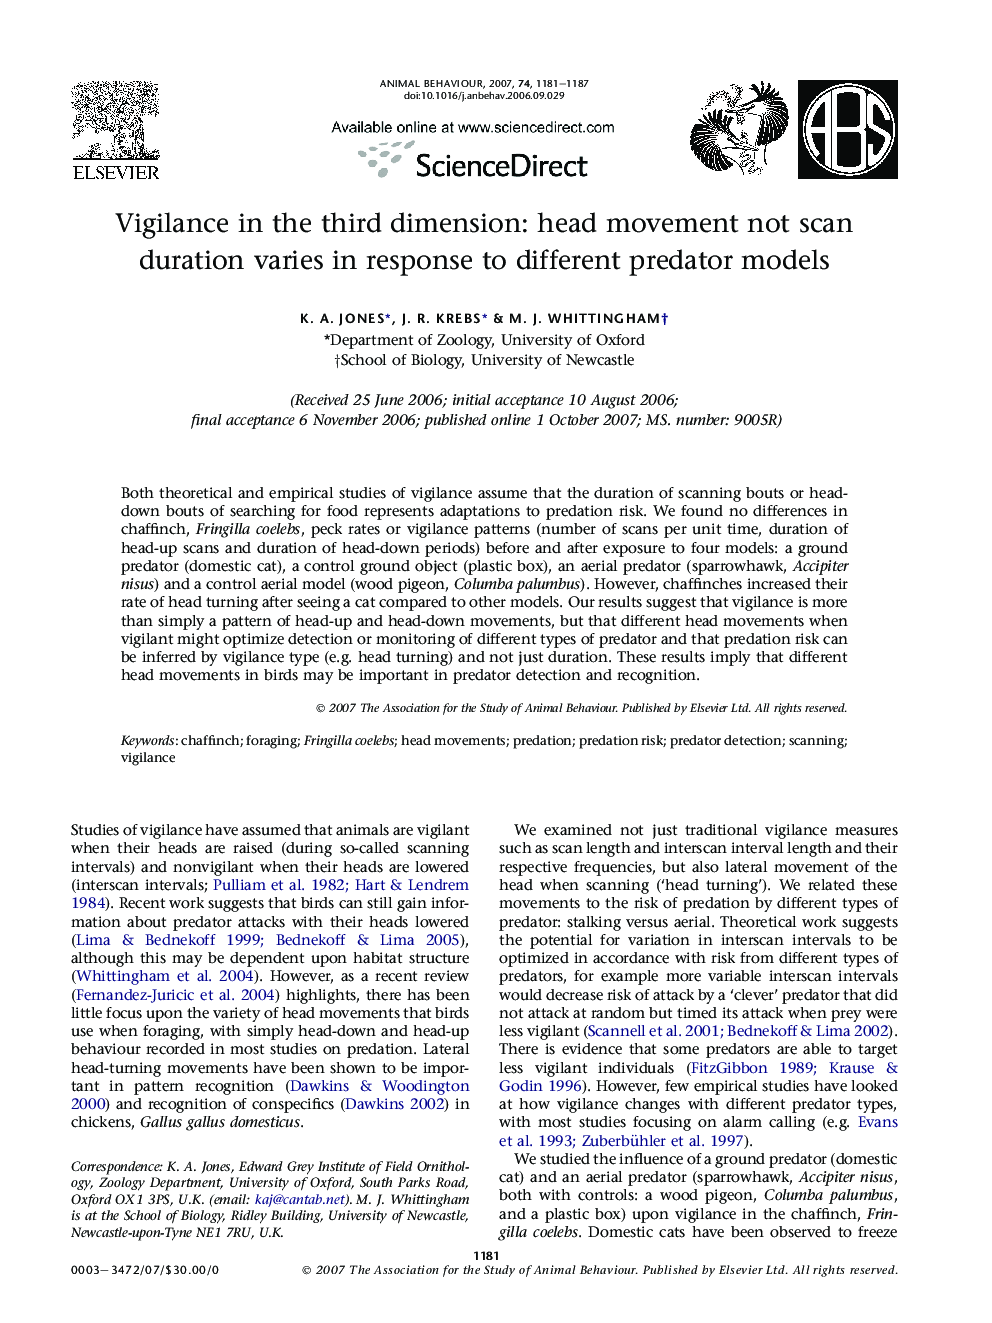 Vigilance in the third dimension: head movement not scan duration varies in response to different predator models